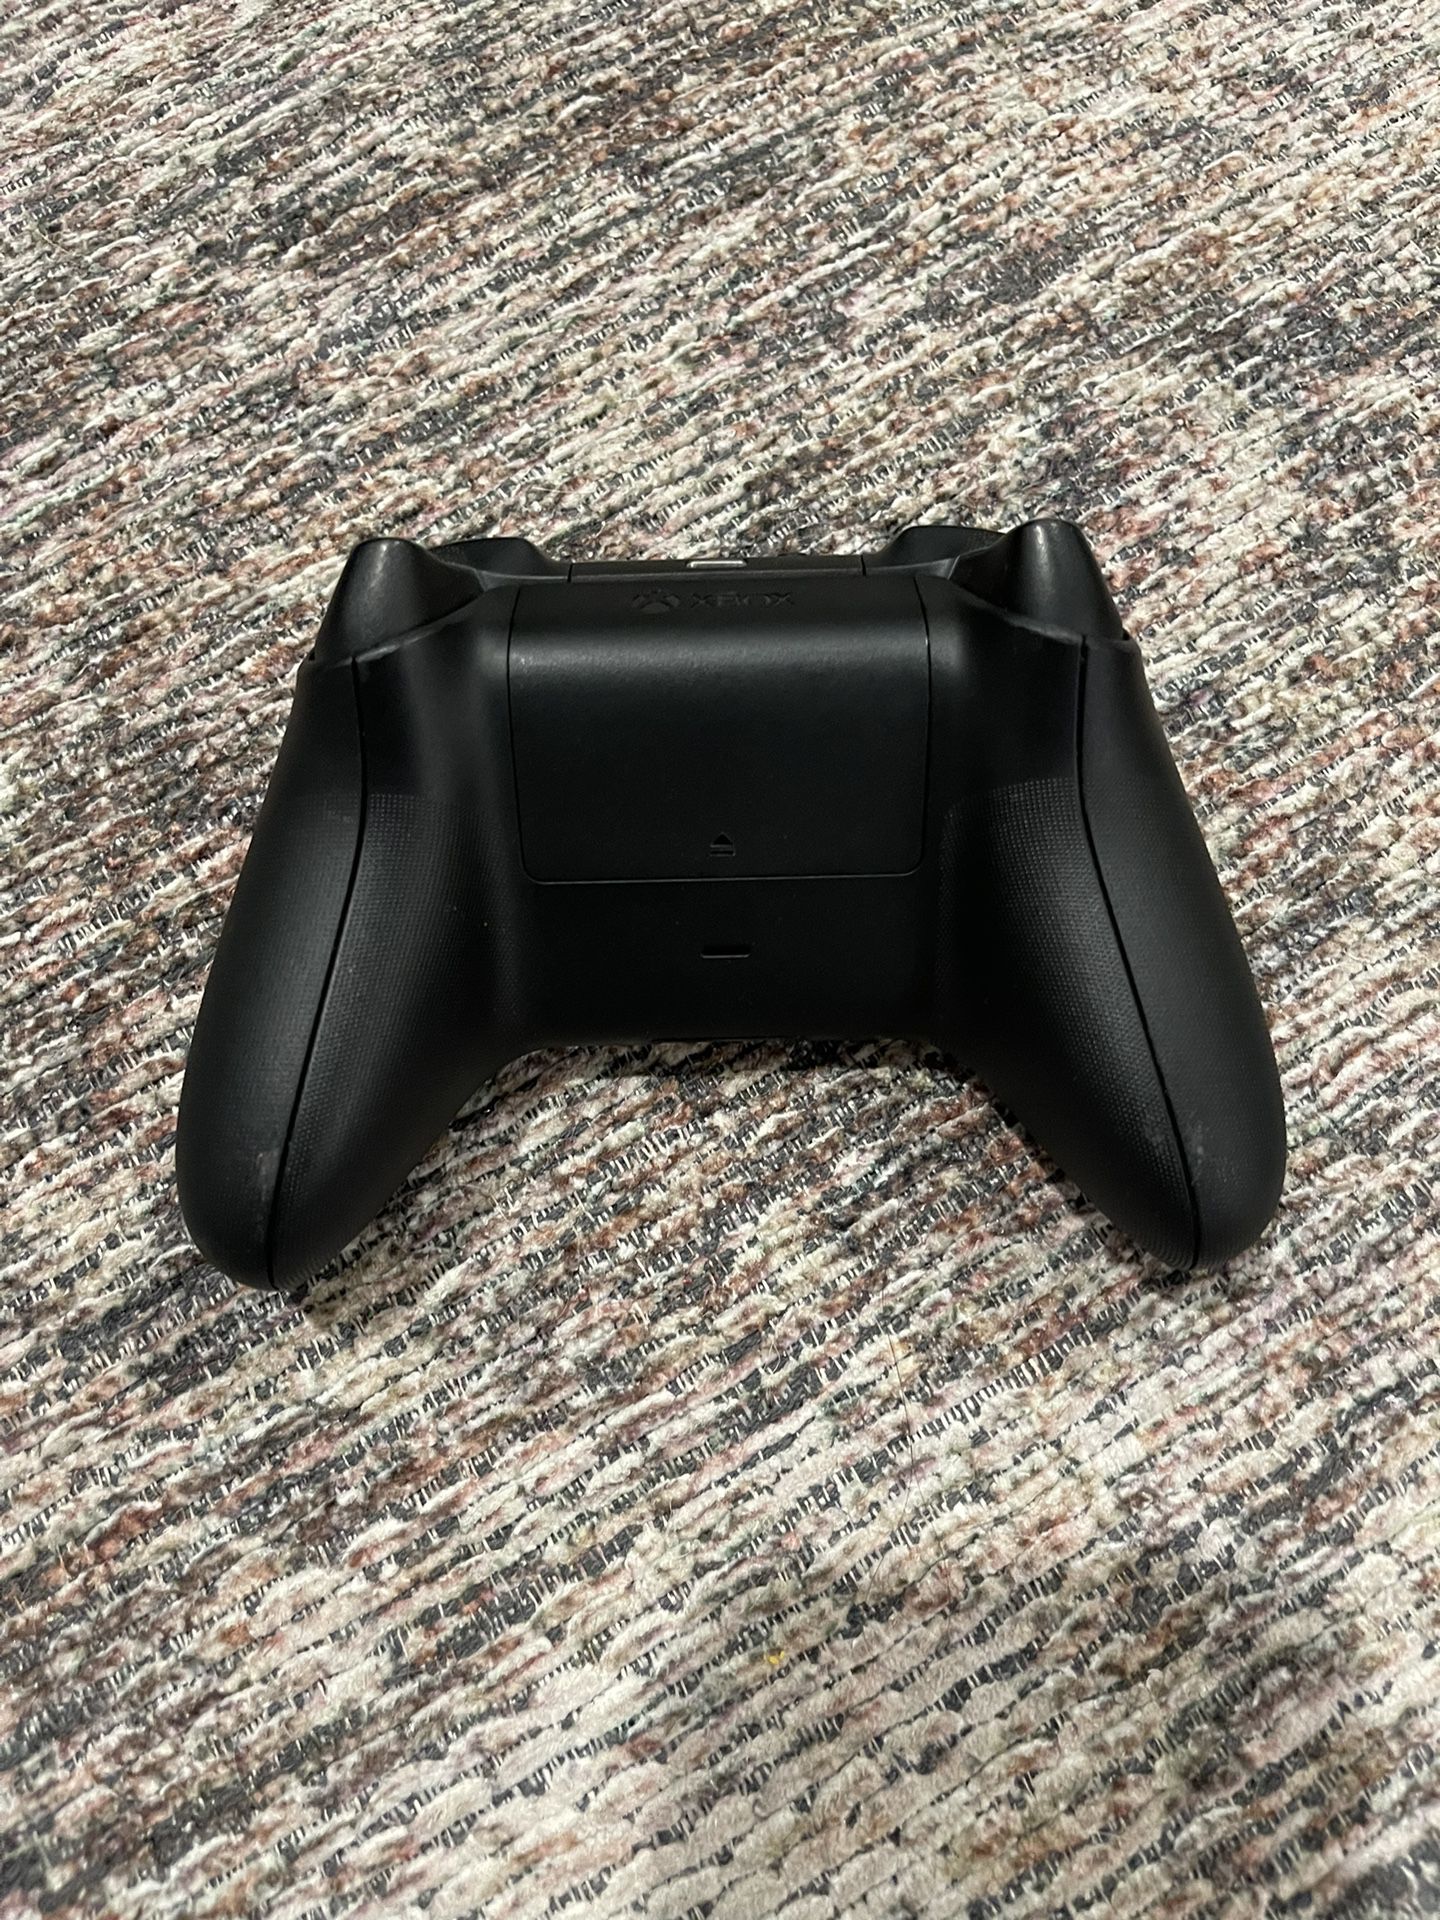 Xbox One Controller Black for Sale in Los Angeles, CA - OfferUp